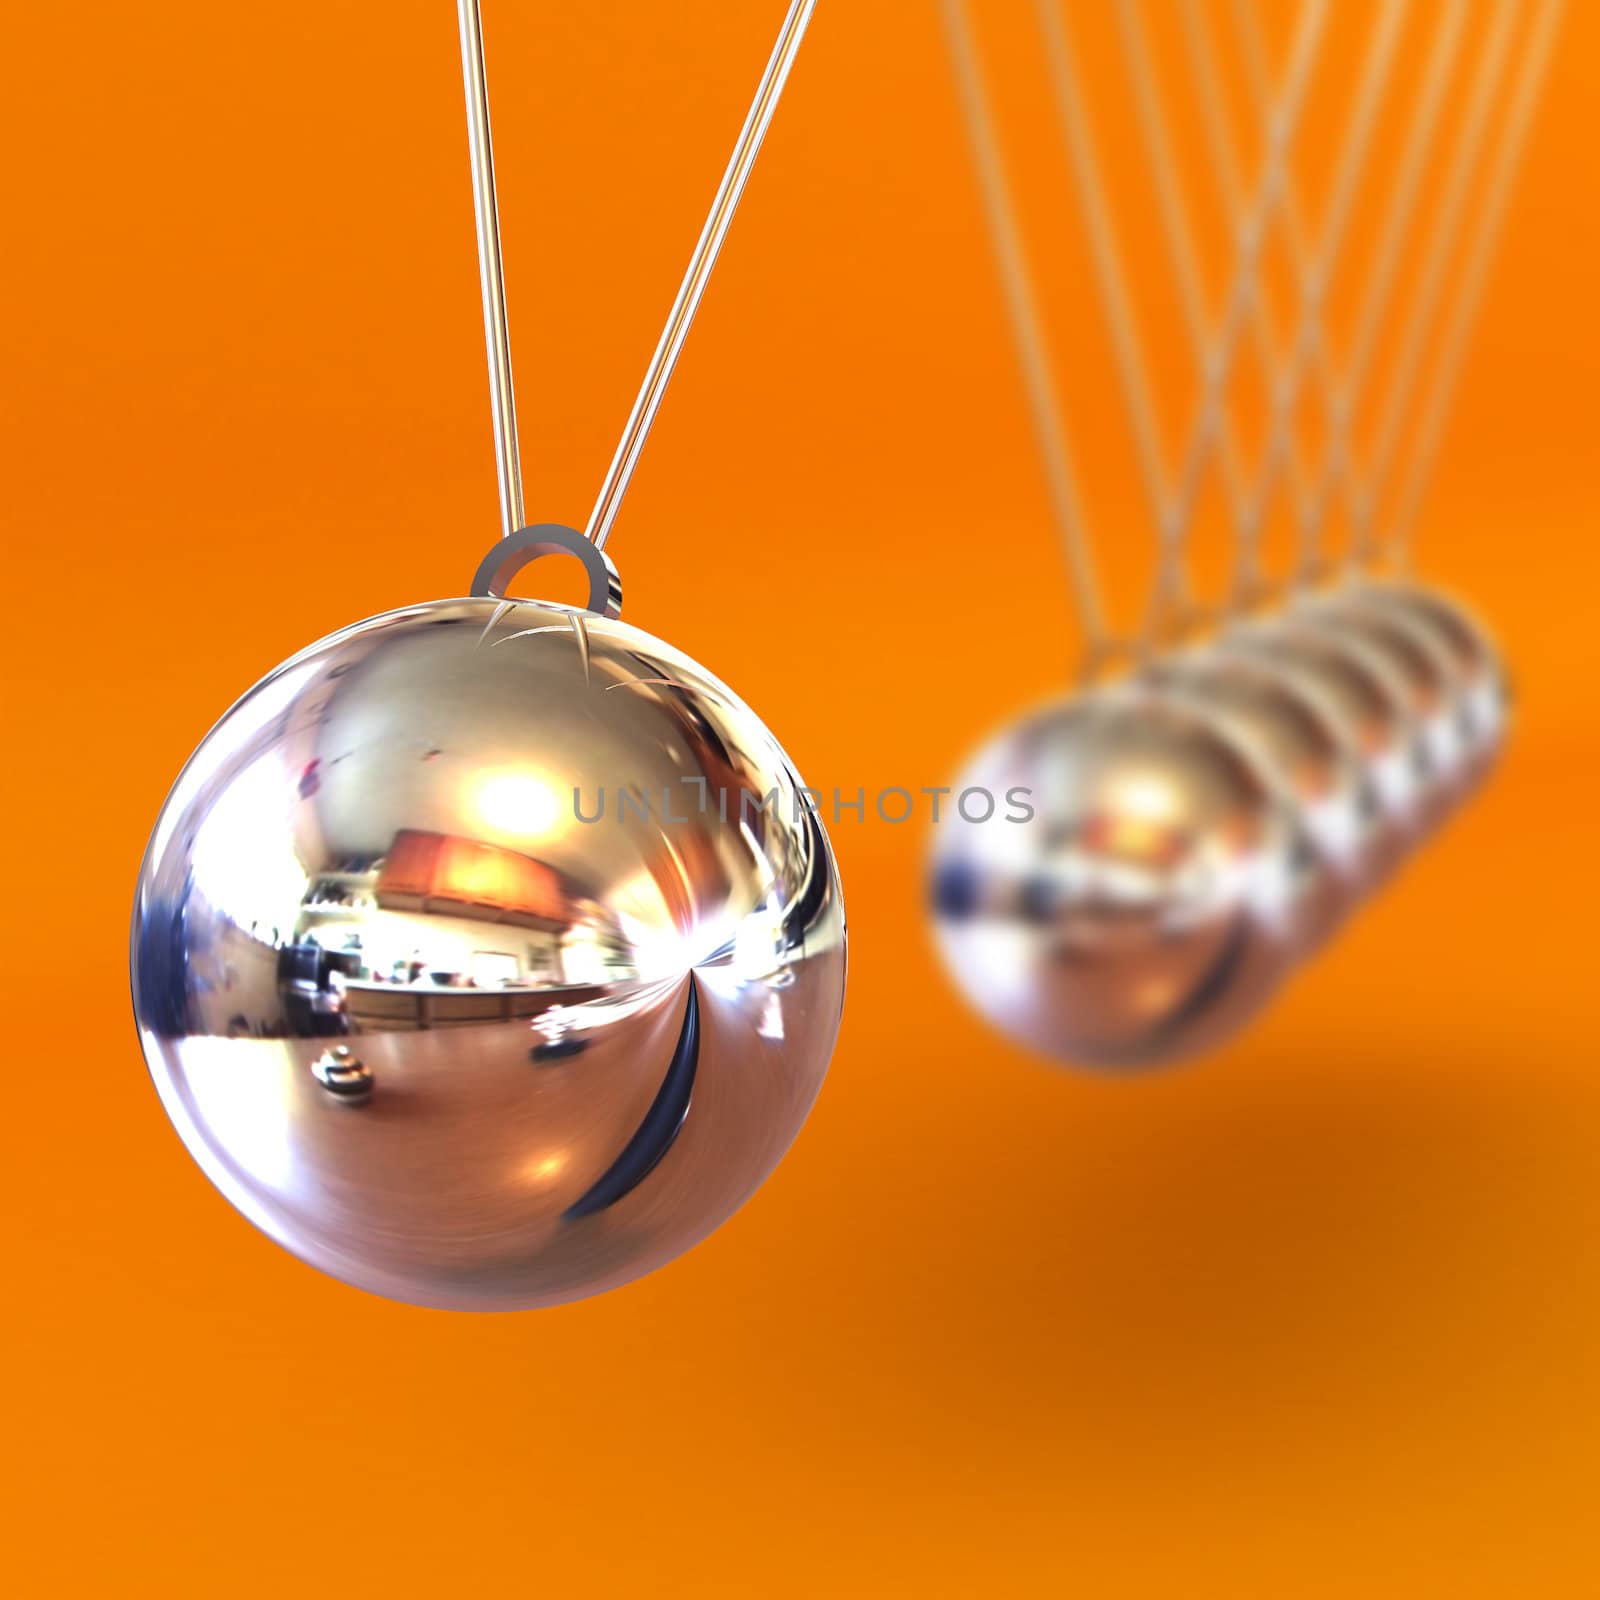 Newtons Cradle against an Orange Background by head-off